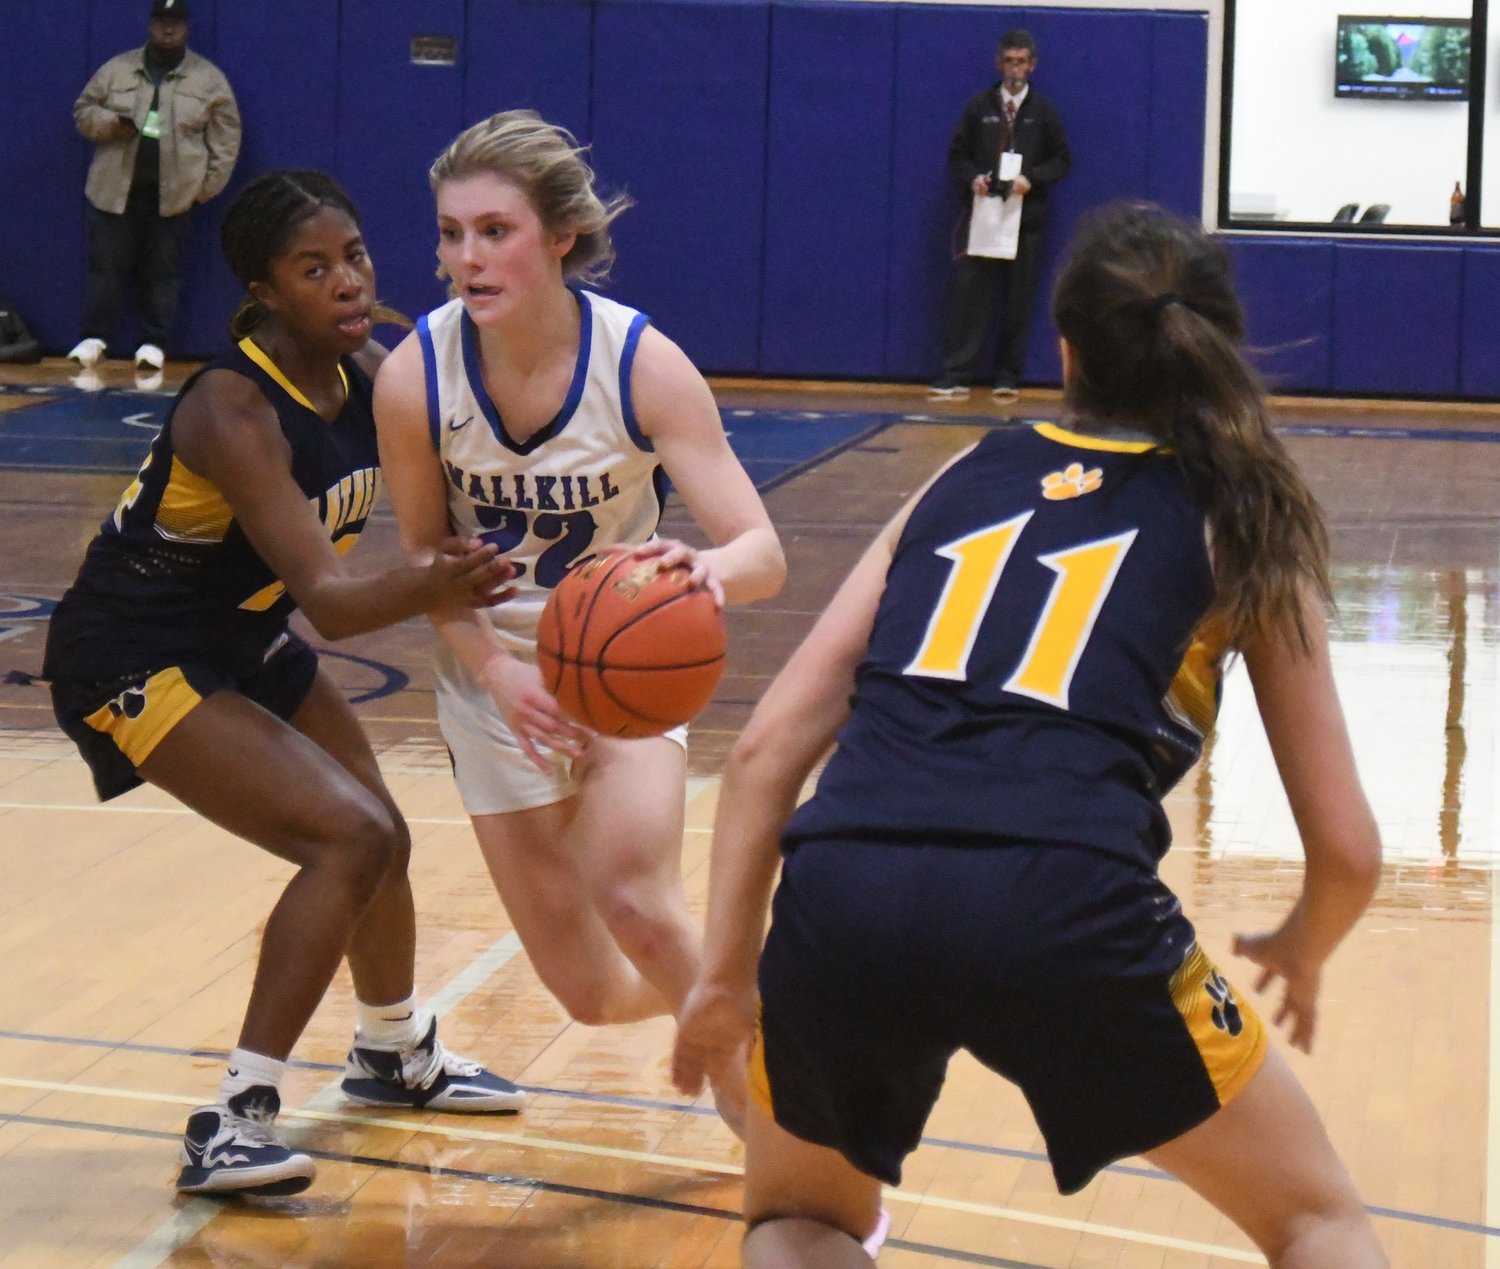 Wallkill's Emma Spindler drives past Walter Panas' Kiara Williams defends and Sarah Chiulli looks on during Saturday's NYSPHSAA Class A regional final at Mount Saint Mary College in Newburgh.